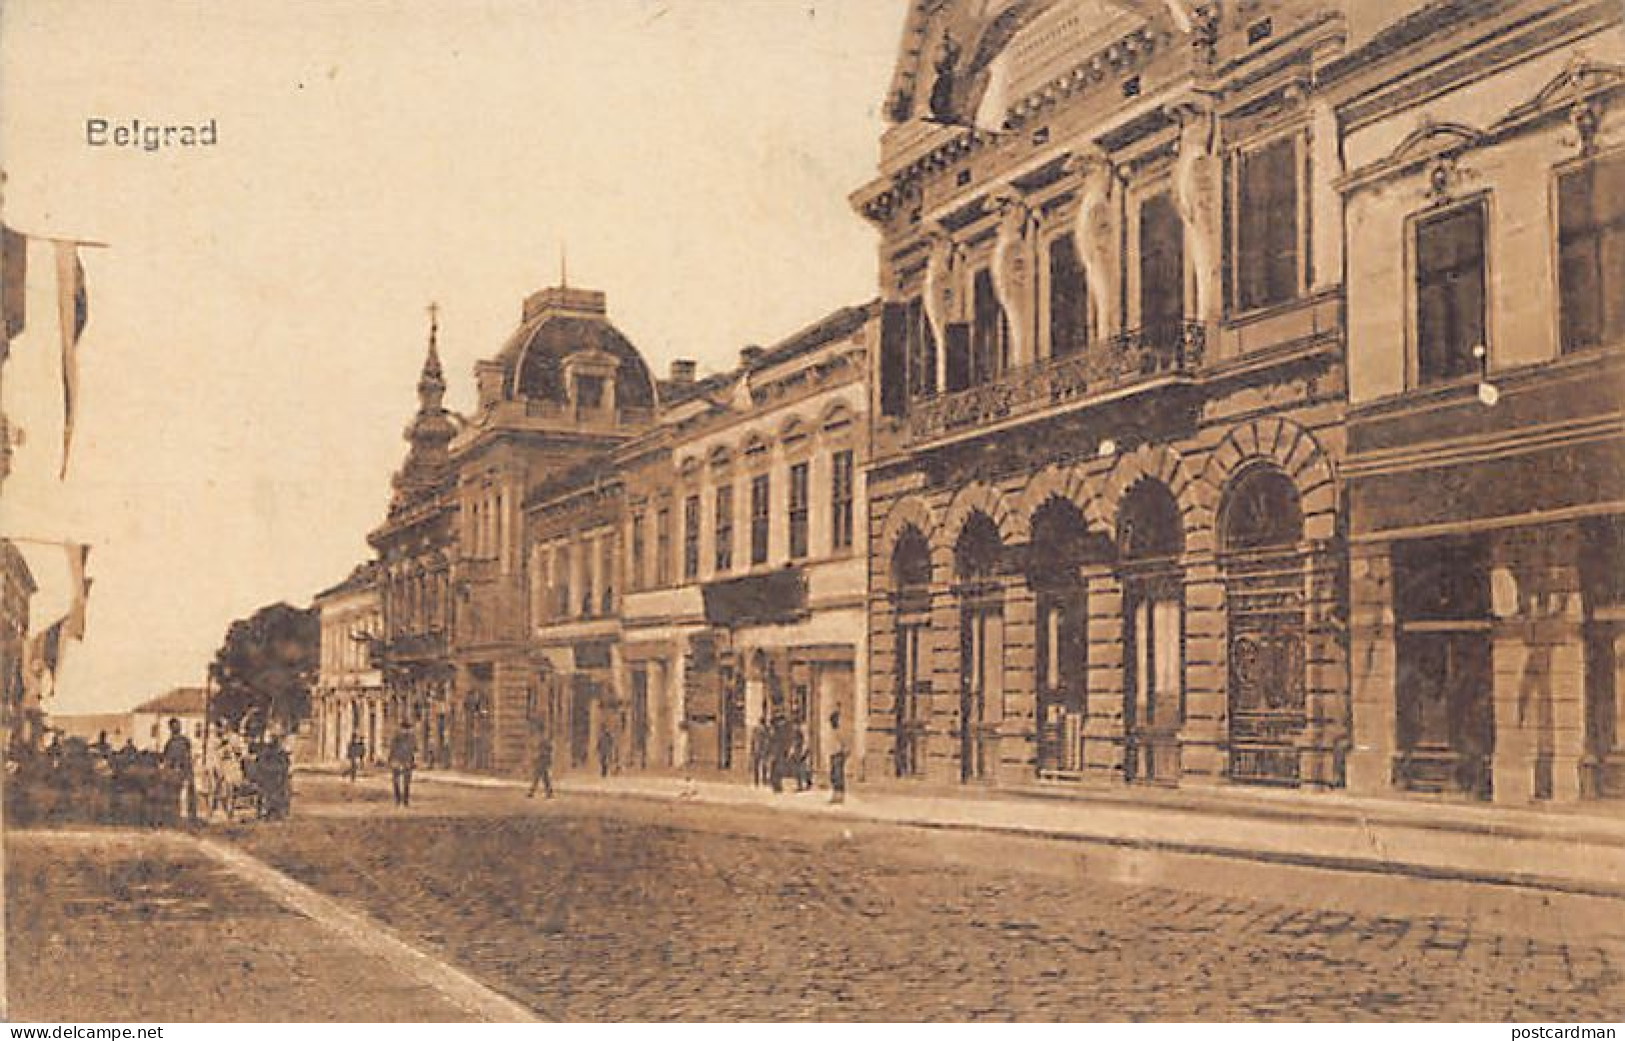 Serbia - BEOGRAD Belgrade - Postcard Published For The Austro-Hungarian Occupation Troops - Serbien